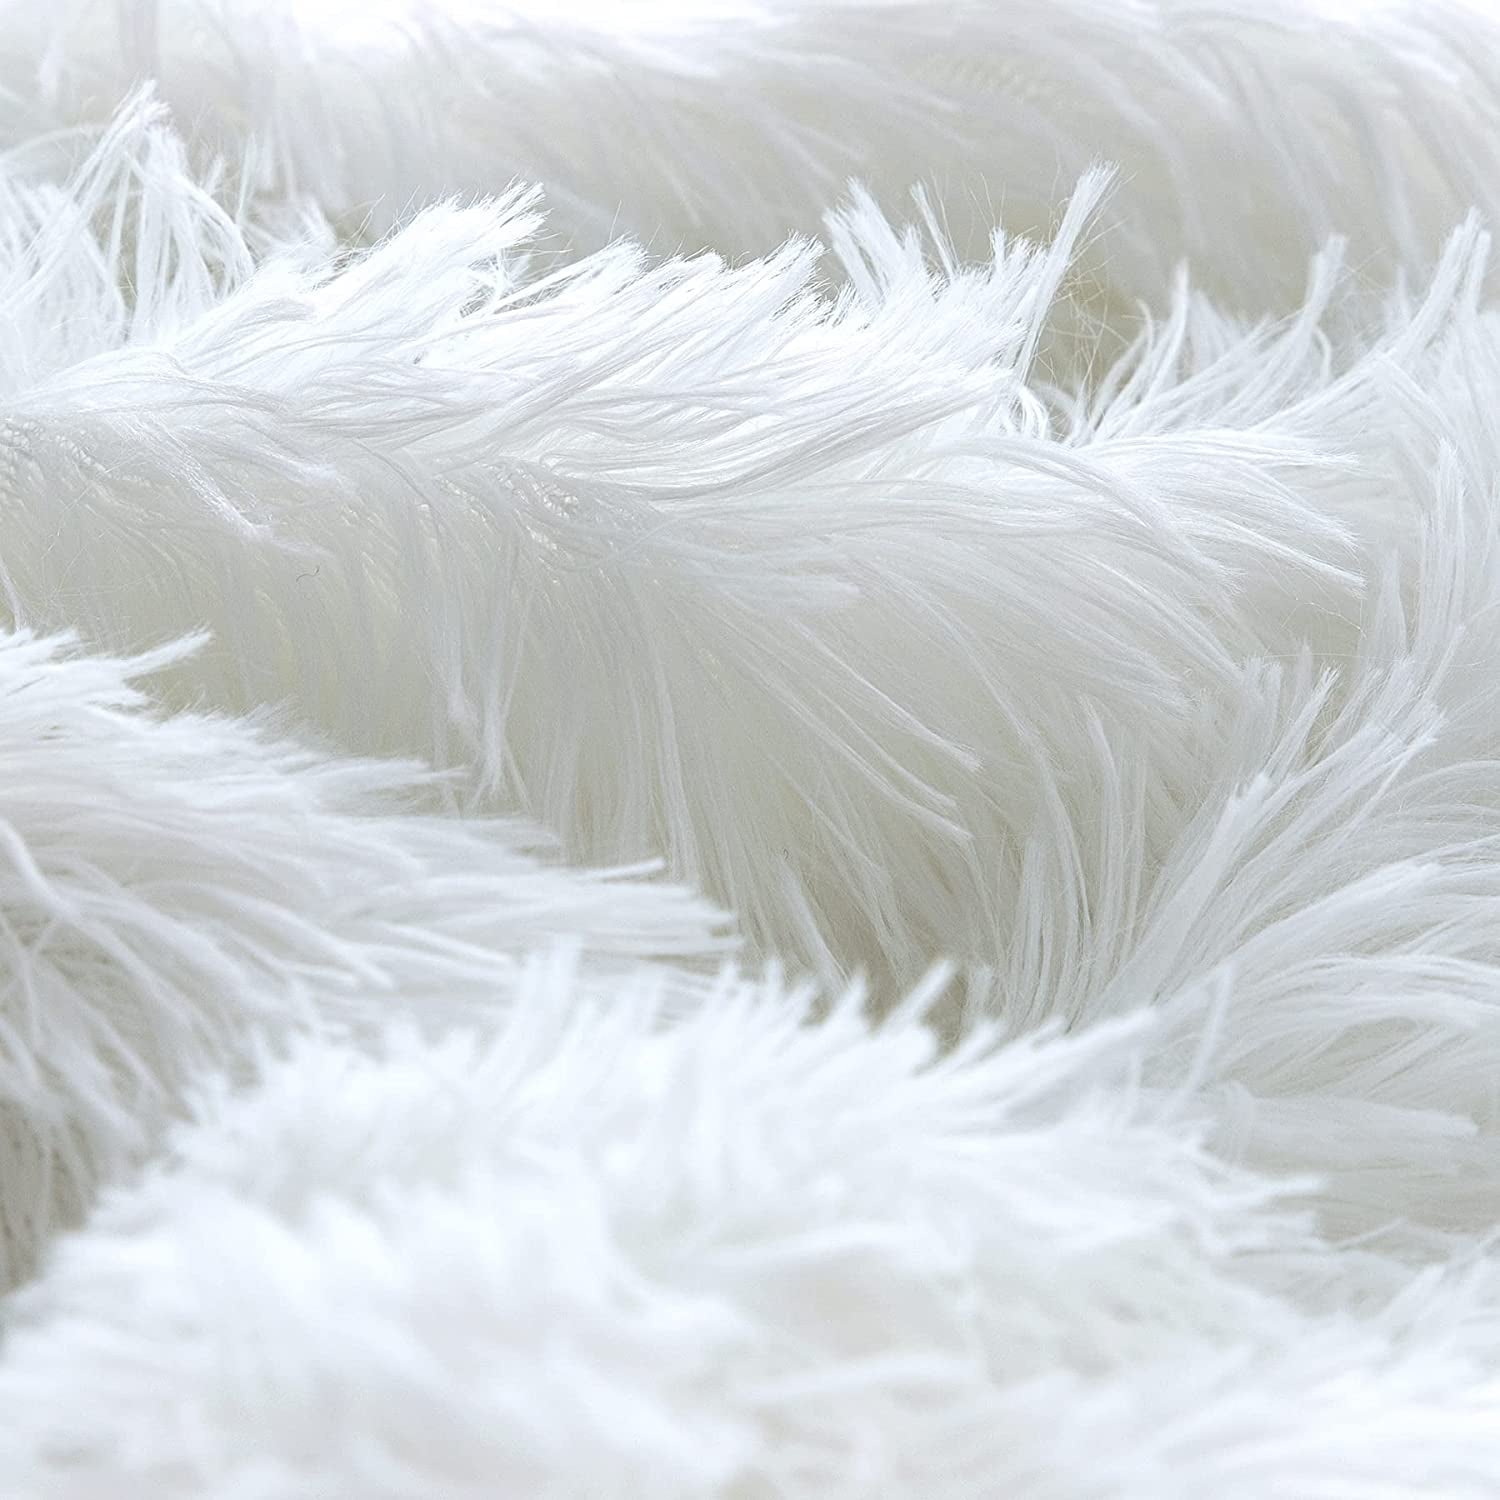 Luxurious Faux Fur Throw Blanket, Premium Shaggy Fuzzy Blanket for Couch, Bed, Sofa, 50" X 60", Elegant Pure White Design